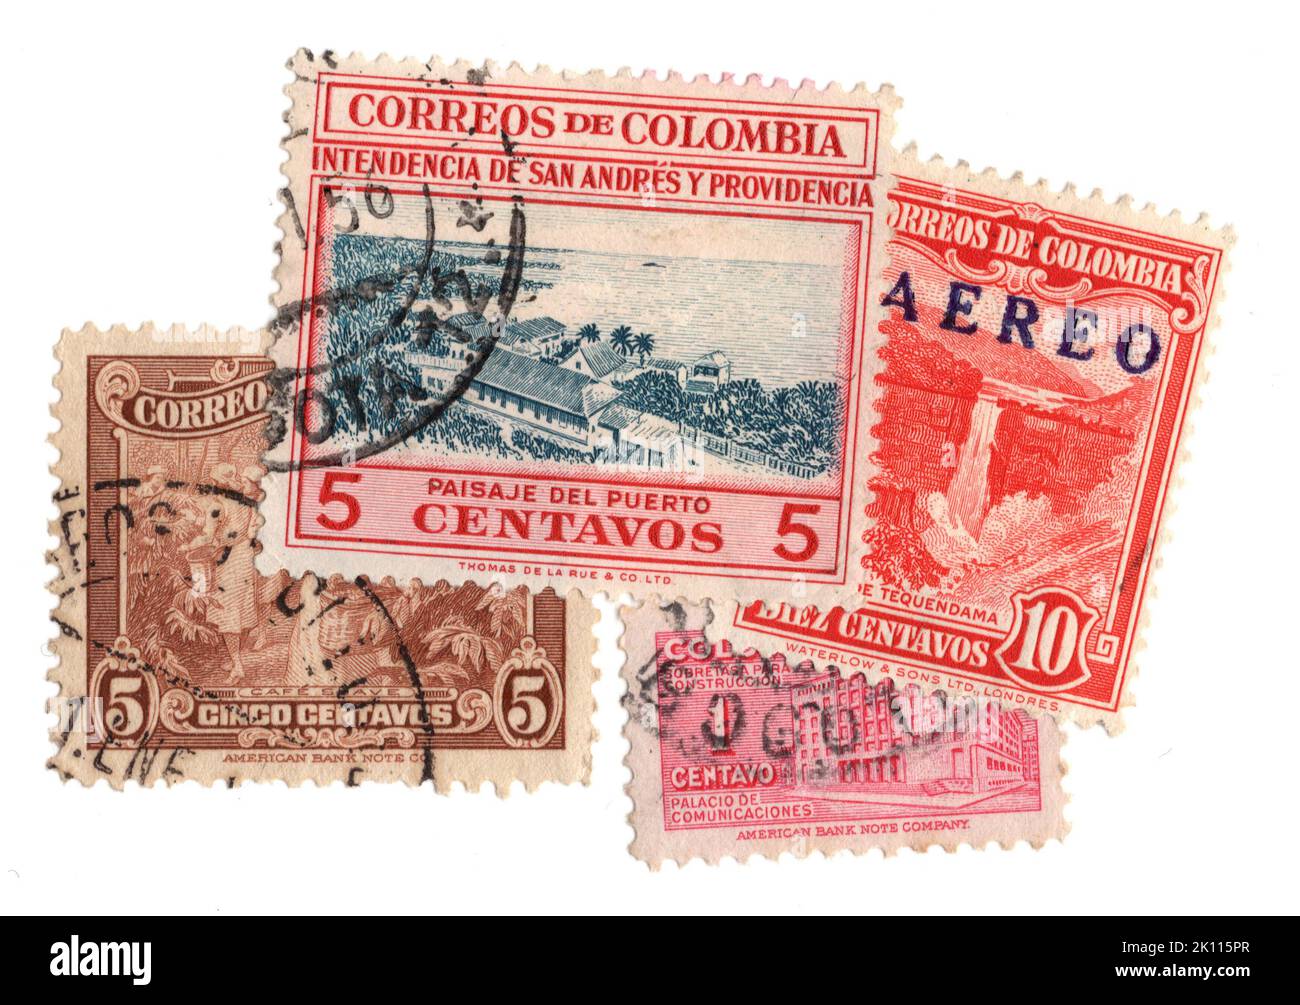 A montage of vintage postage stamps from Colombia on a white background. Stock Photo